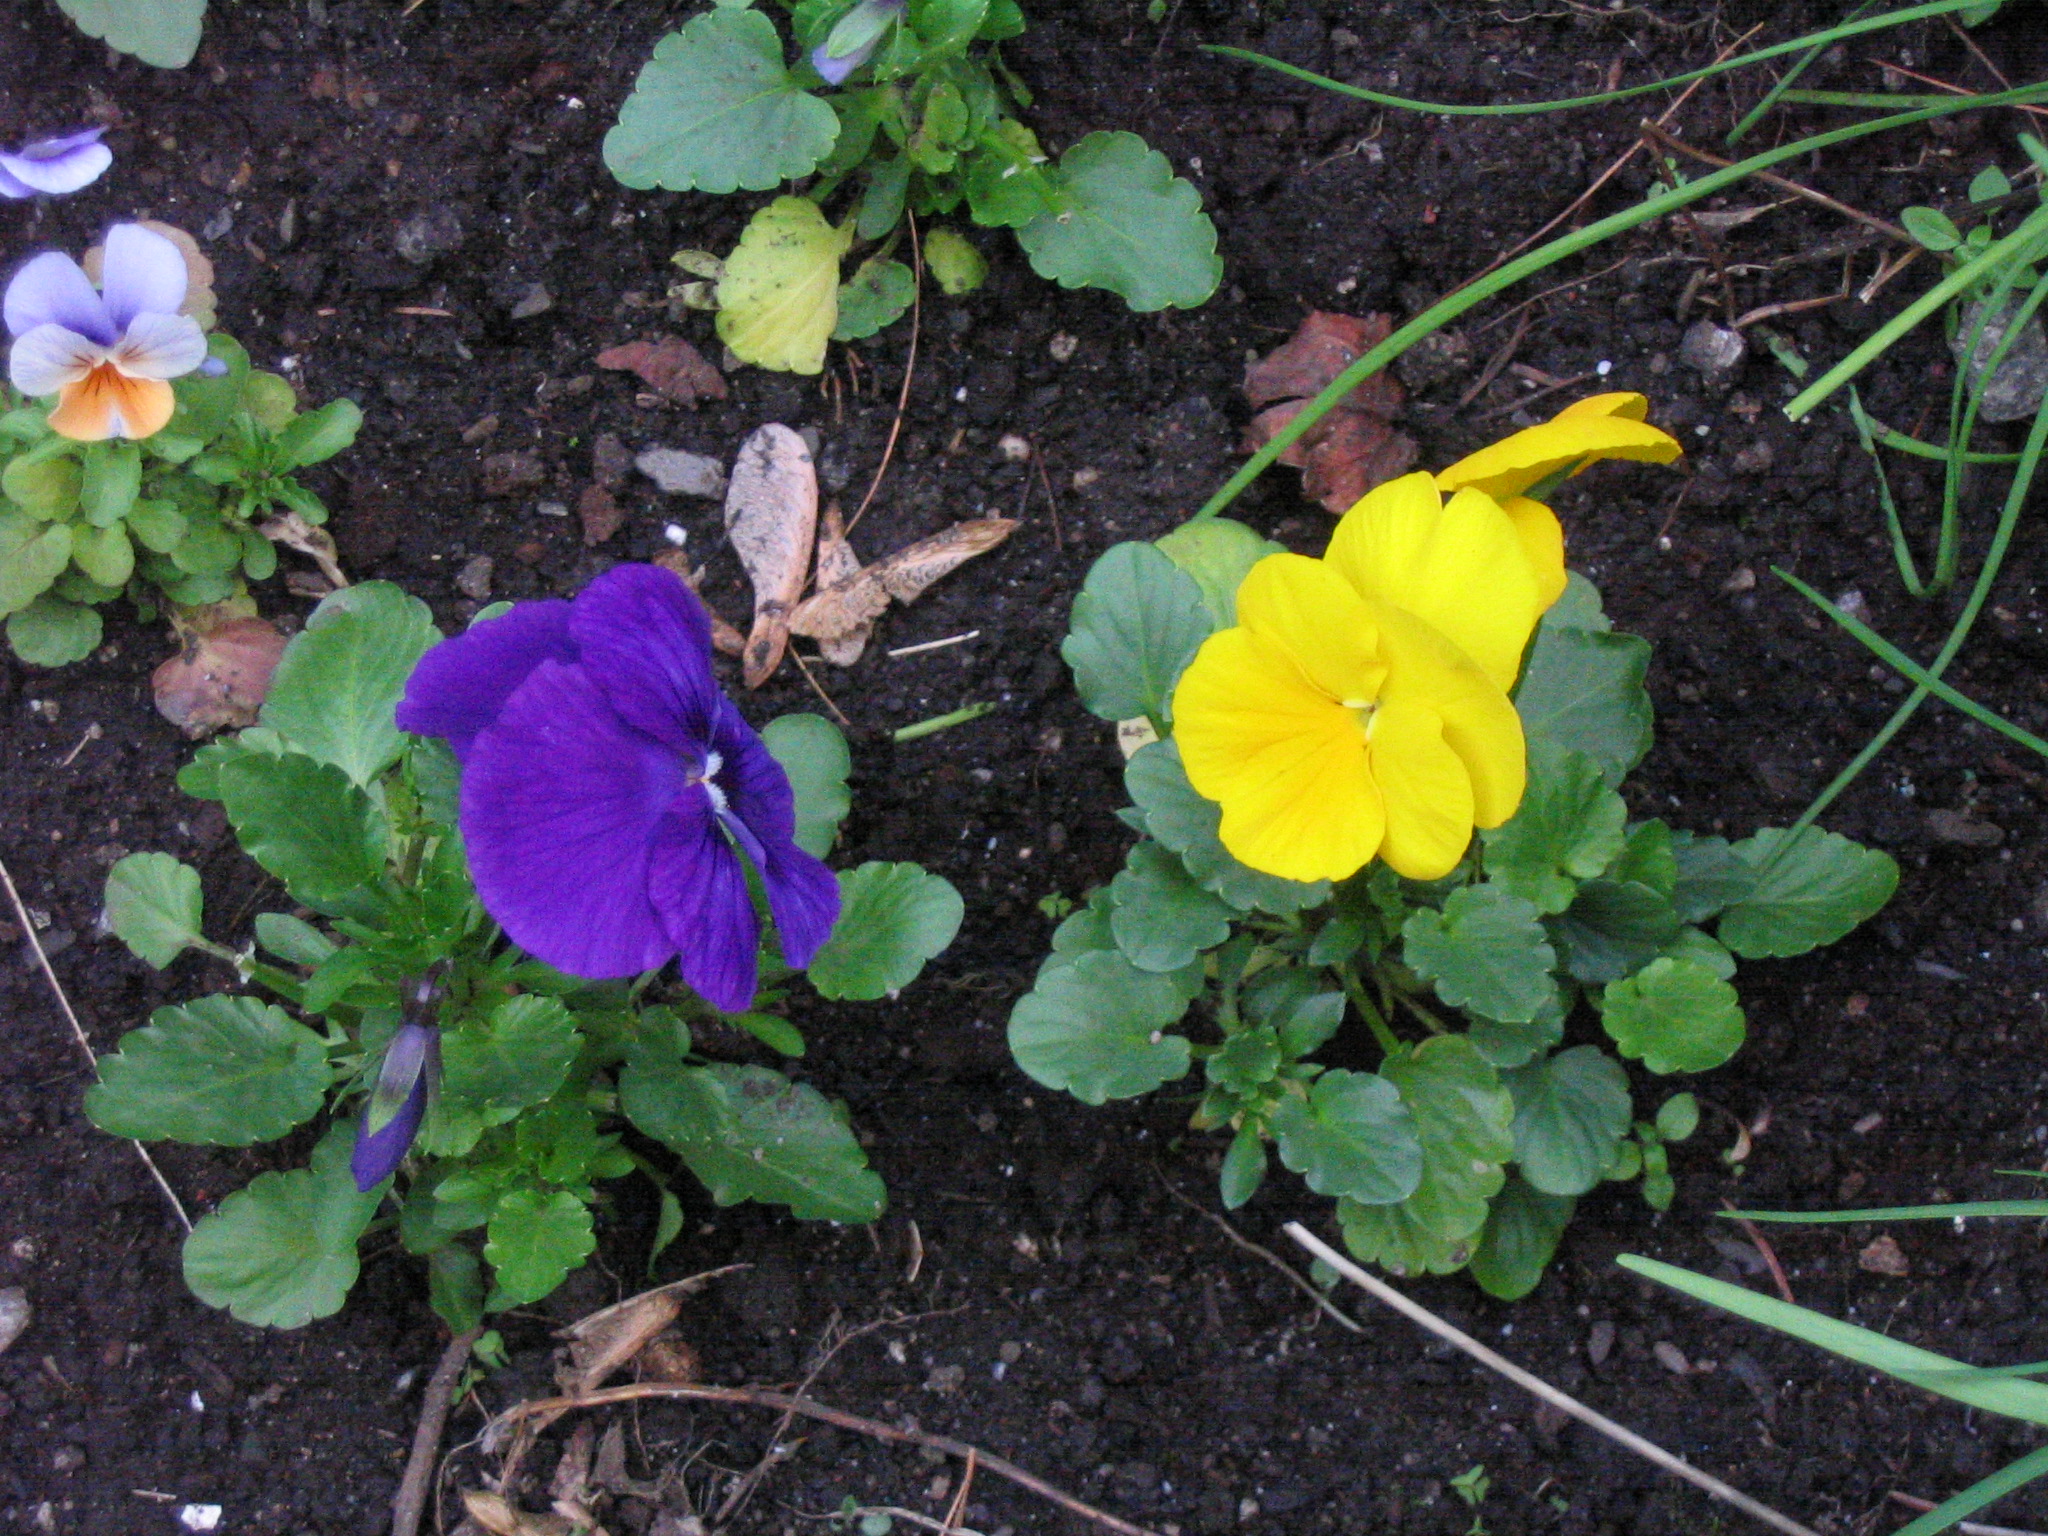 two flowers, one purple and yellow, in a dirt bed